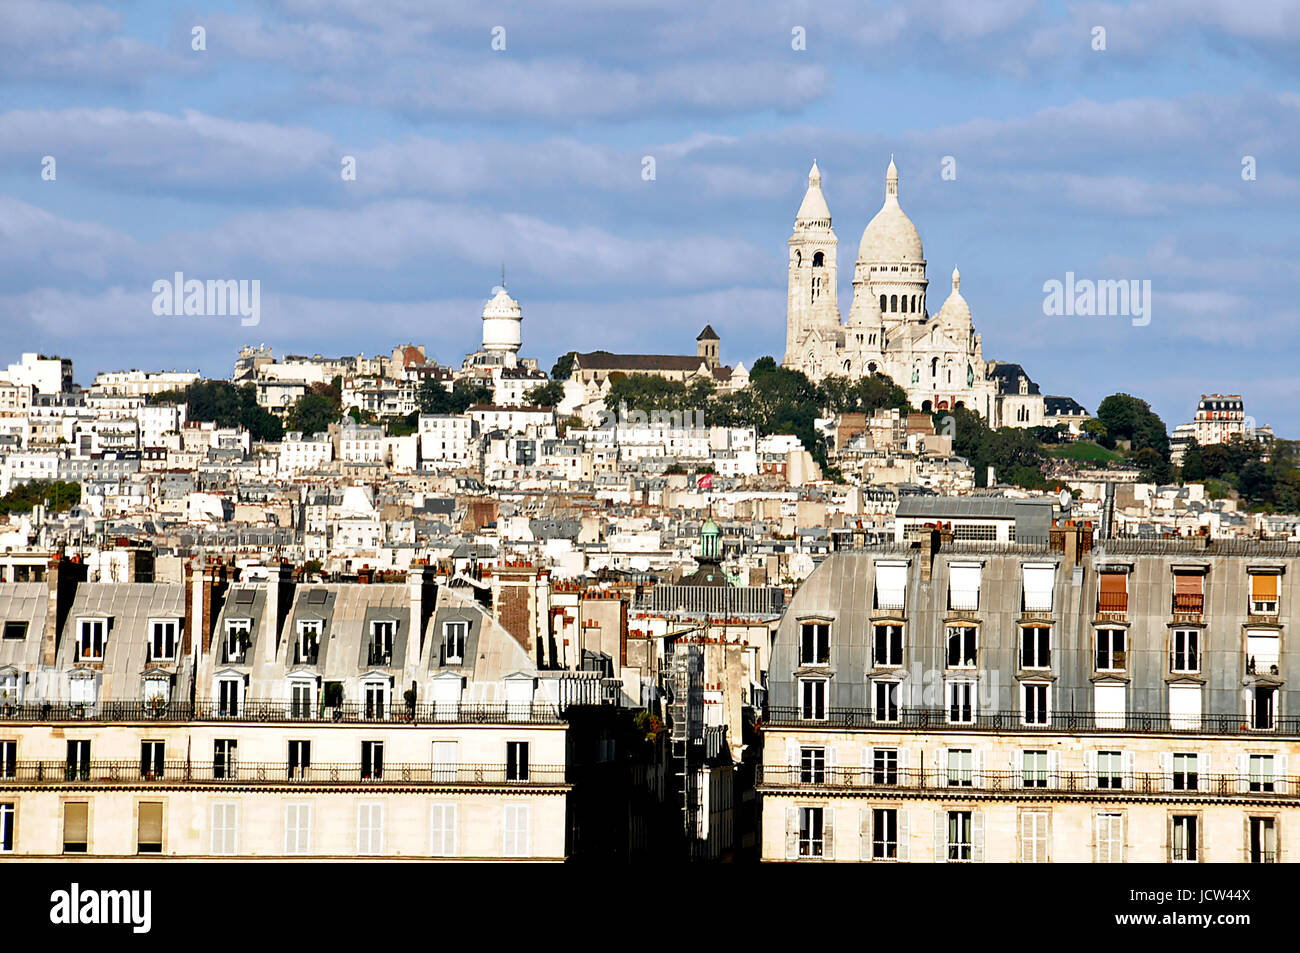 A distant View of  the Sacré-Cœur Basilica from within the Musee d'Orsay in Paris, France, on 9/26/2015 Stock Photo